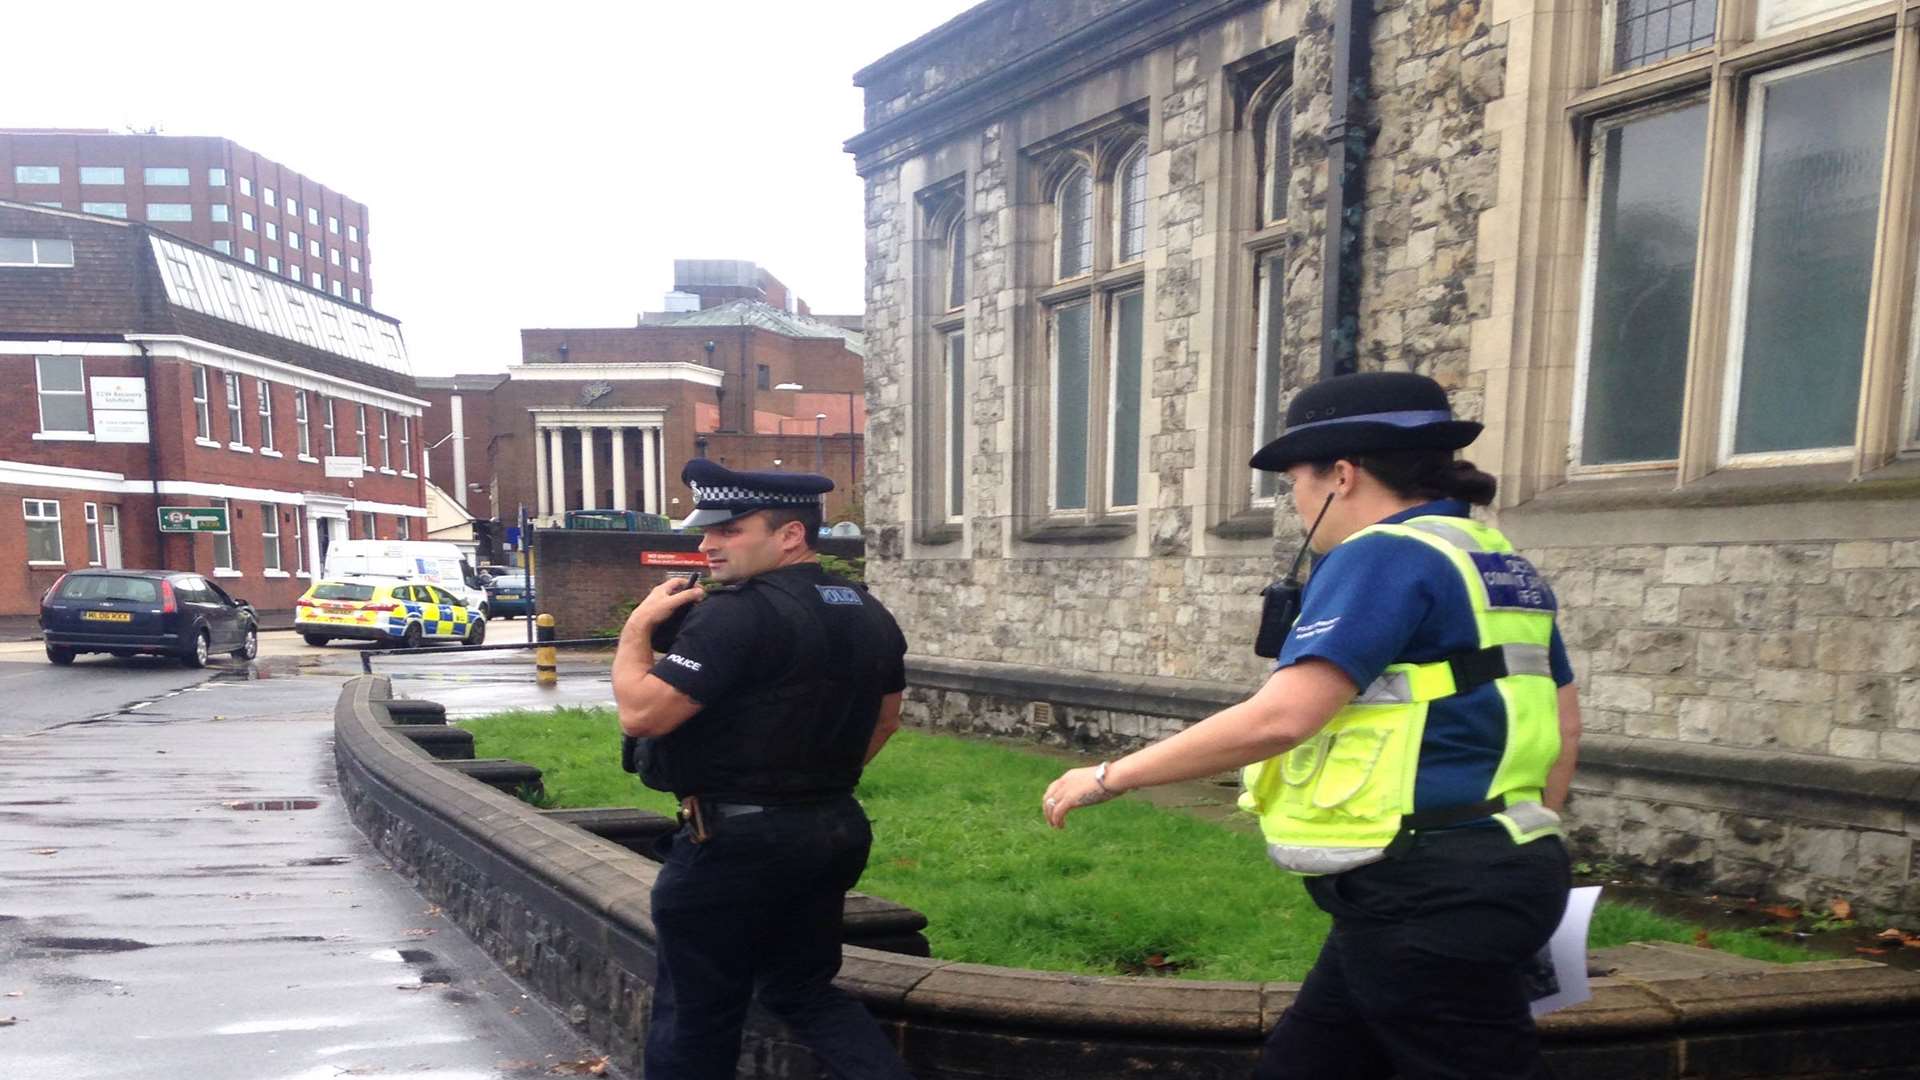 Police searching for McAvoy outside Maidstone Magistrates' Court after he went missing